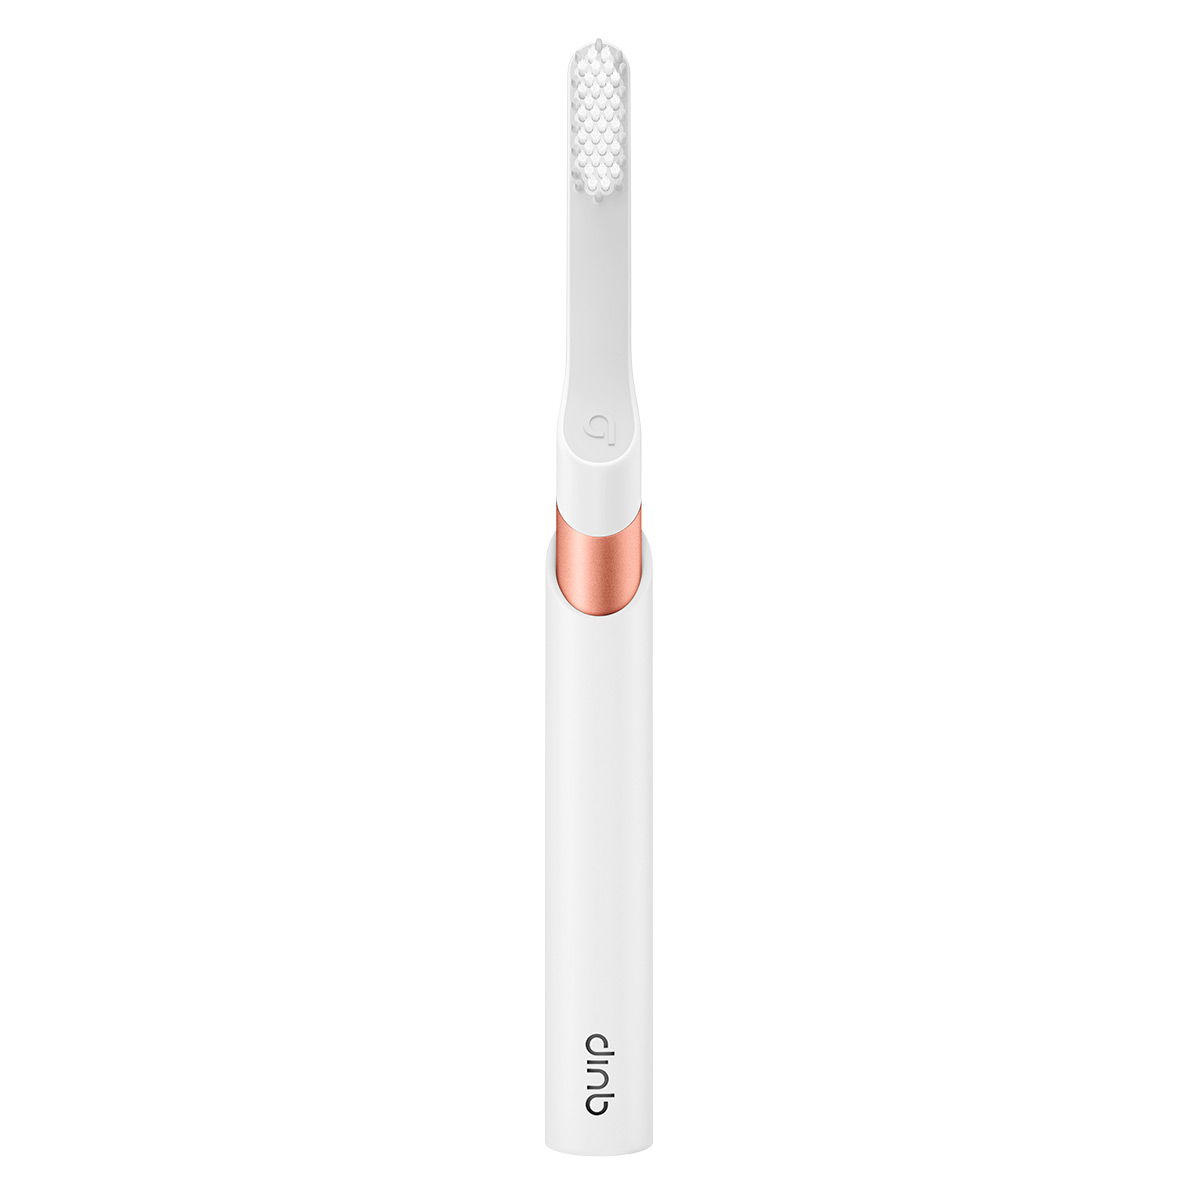 Quip Electric Toothbrush Copper Metal